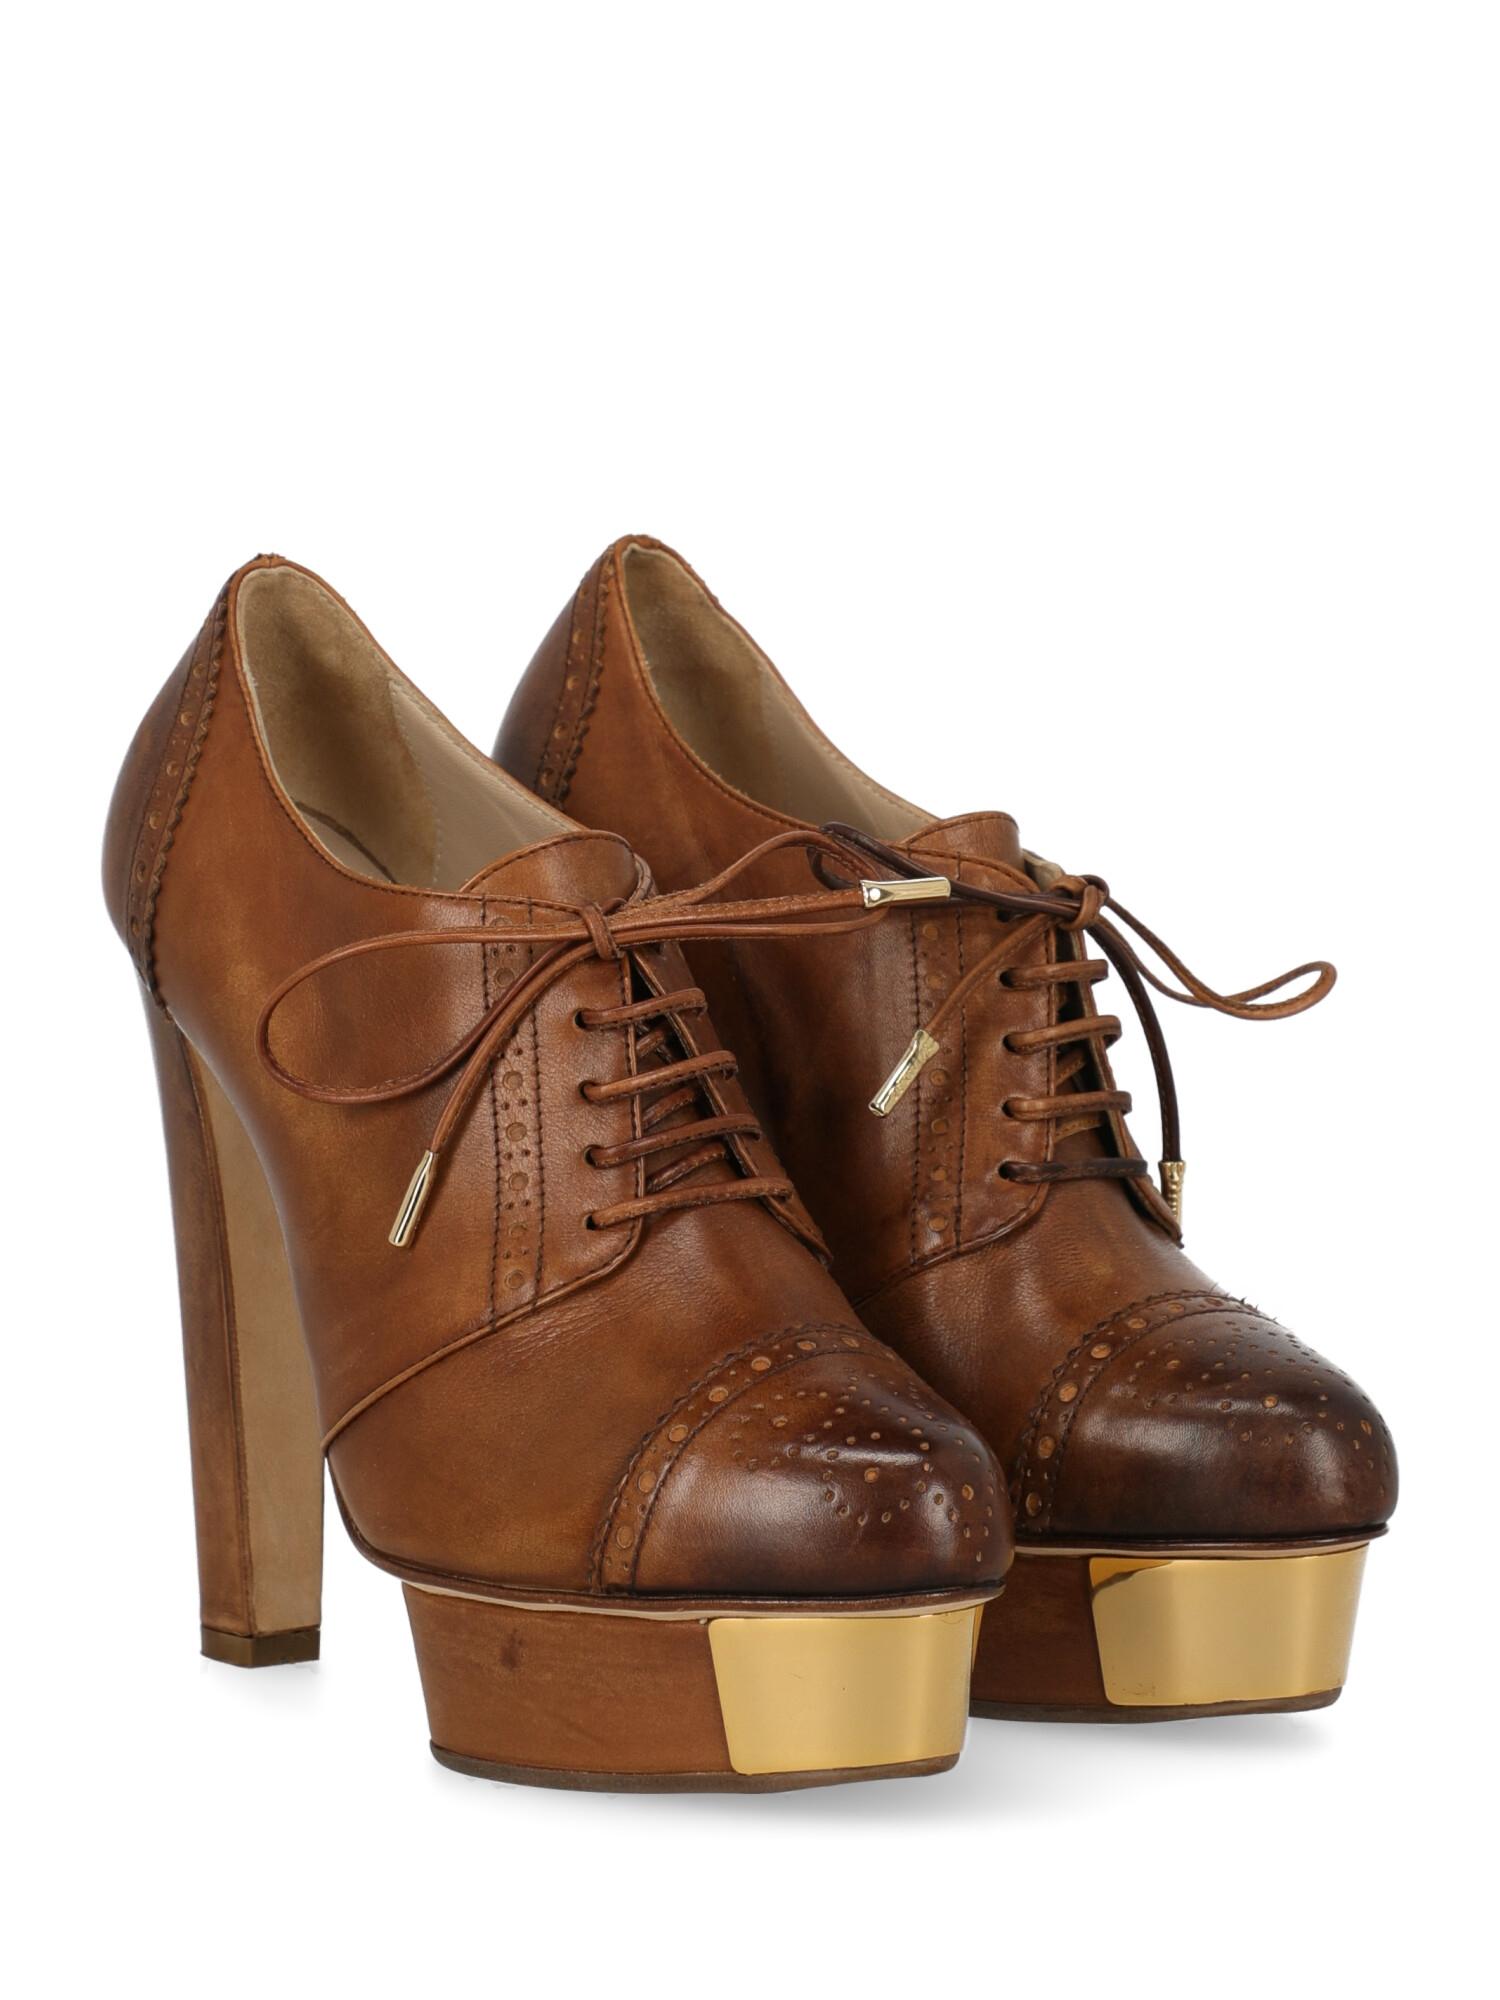 Shoe, leather, solid color, internal logo, lace-up, gold-tone hardware, round toe, leather insole, stiletto heel, high heel.

Product Condition: Very Good
Heel: visible mark. Sole: negligible signs of use. Upper: slightly visible stains.